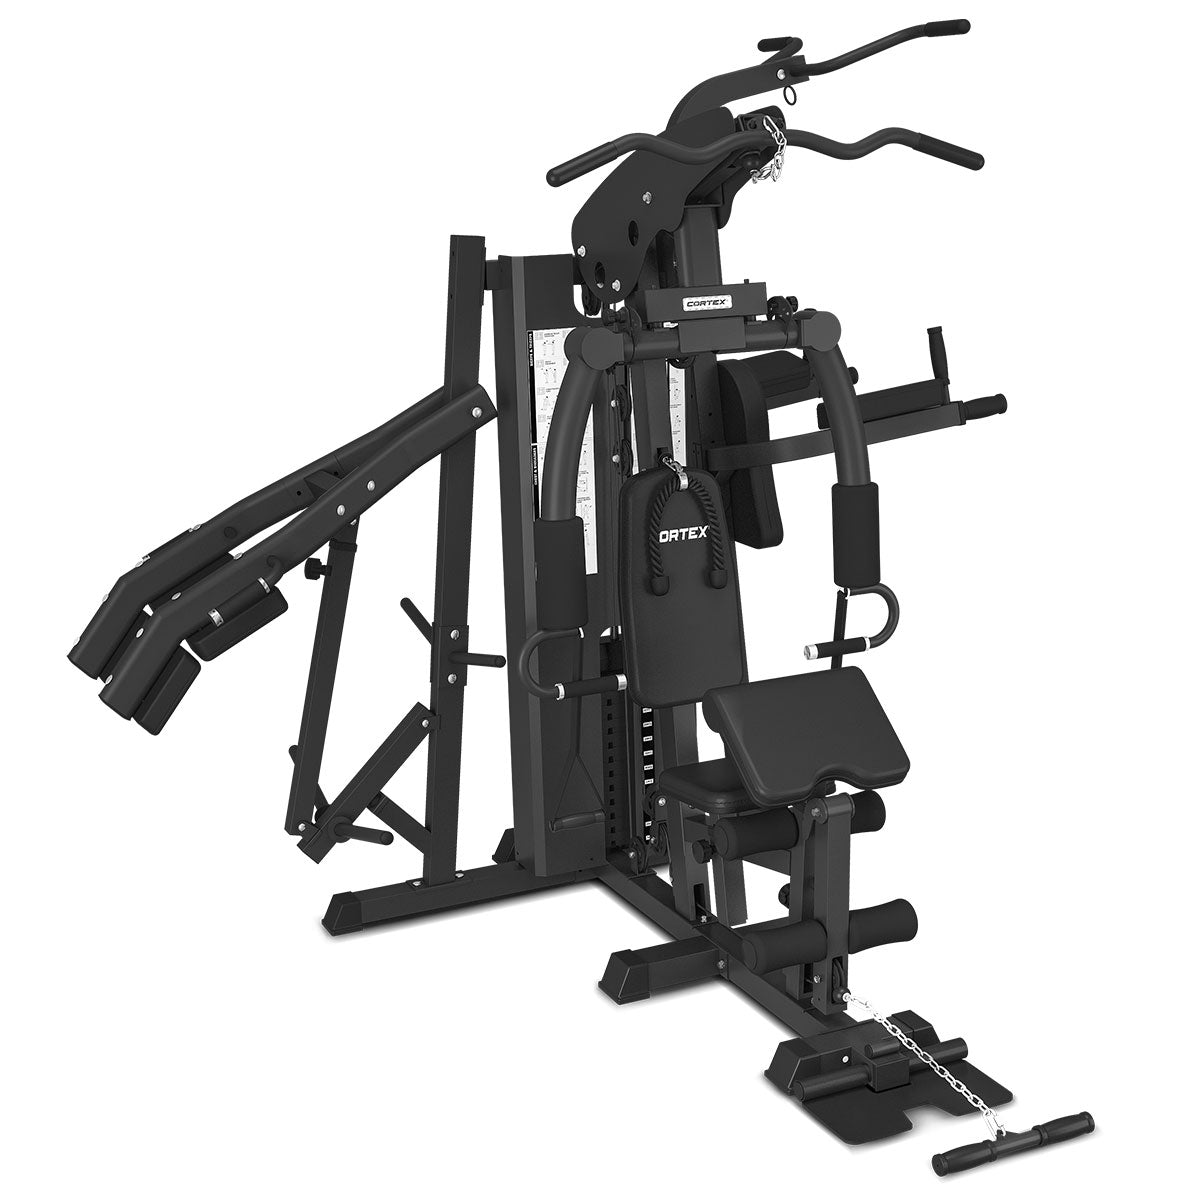 Cortex GS7 Multi Station Multi-Function Home Gym with 73kg Stack